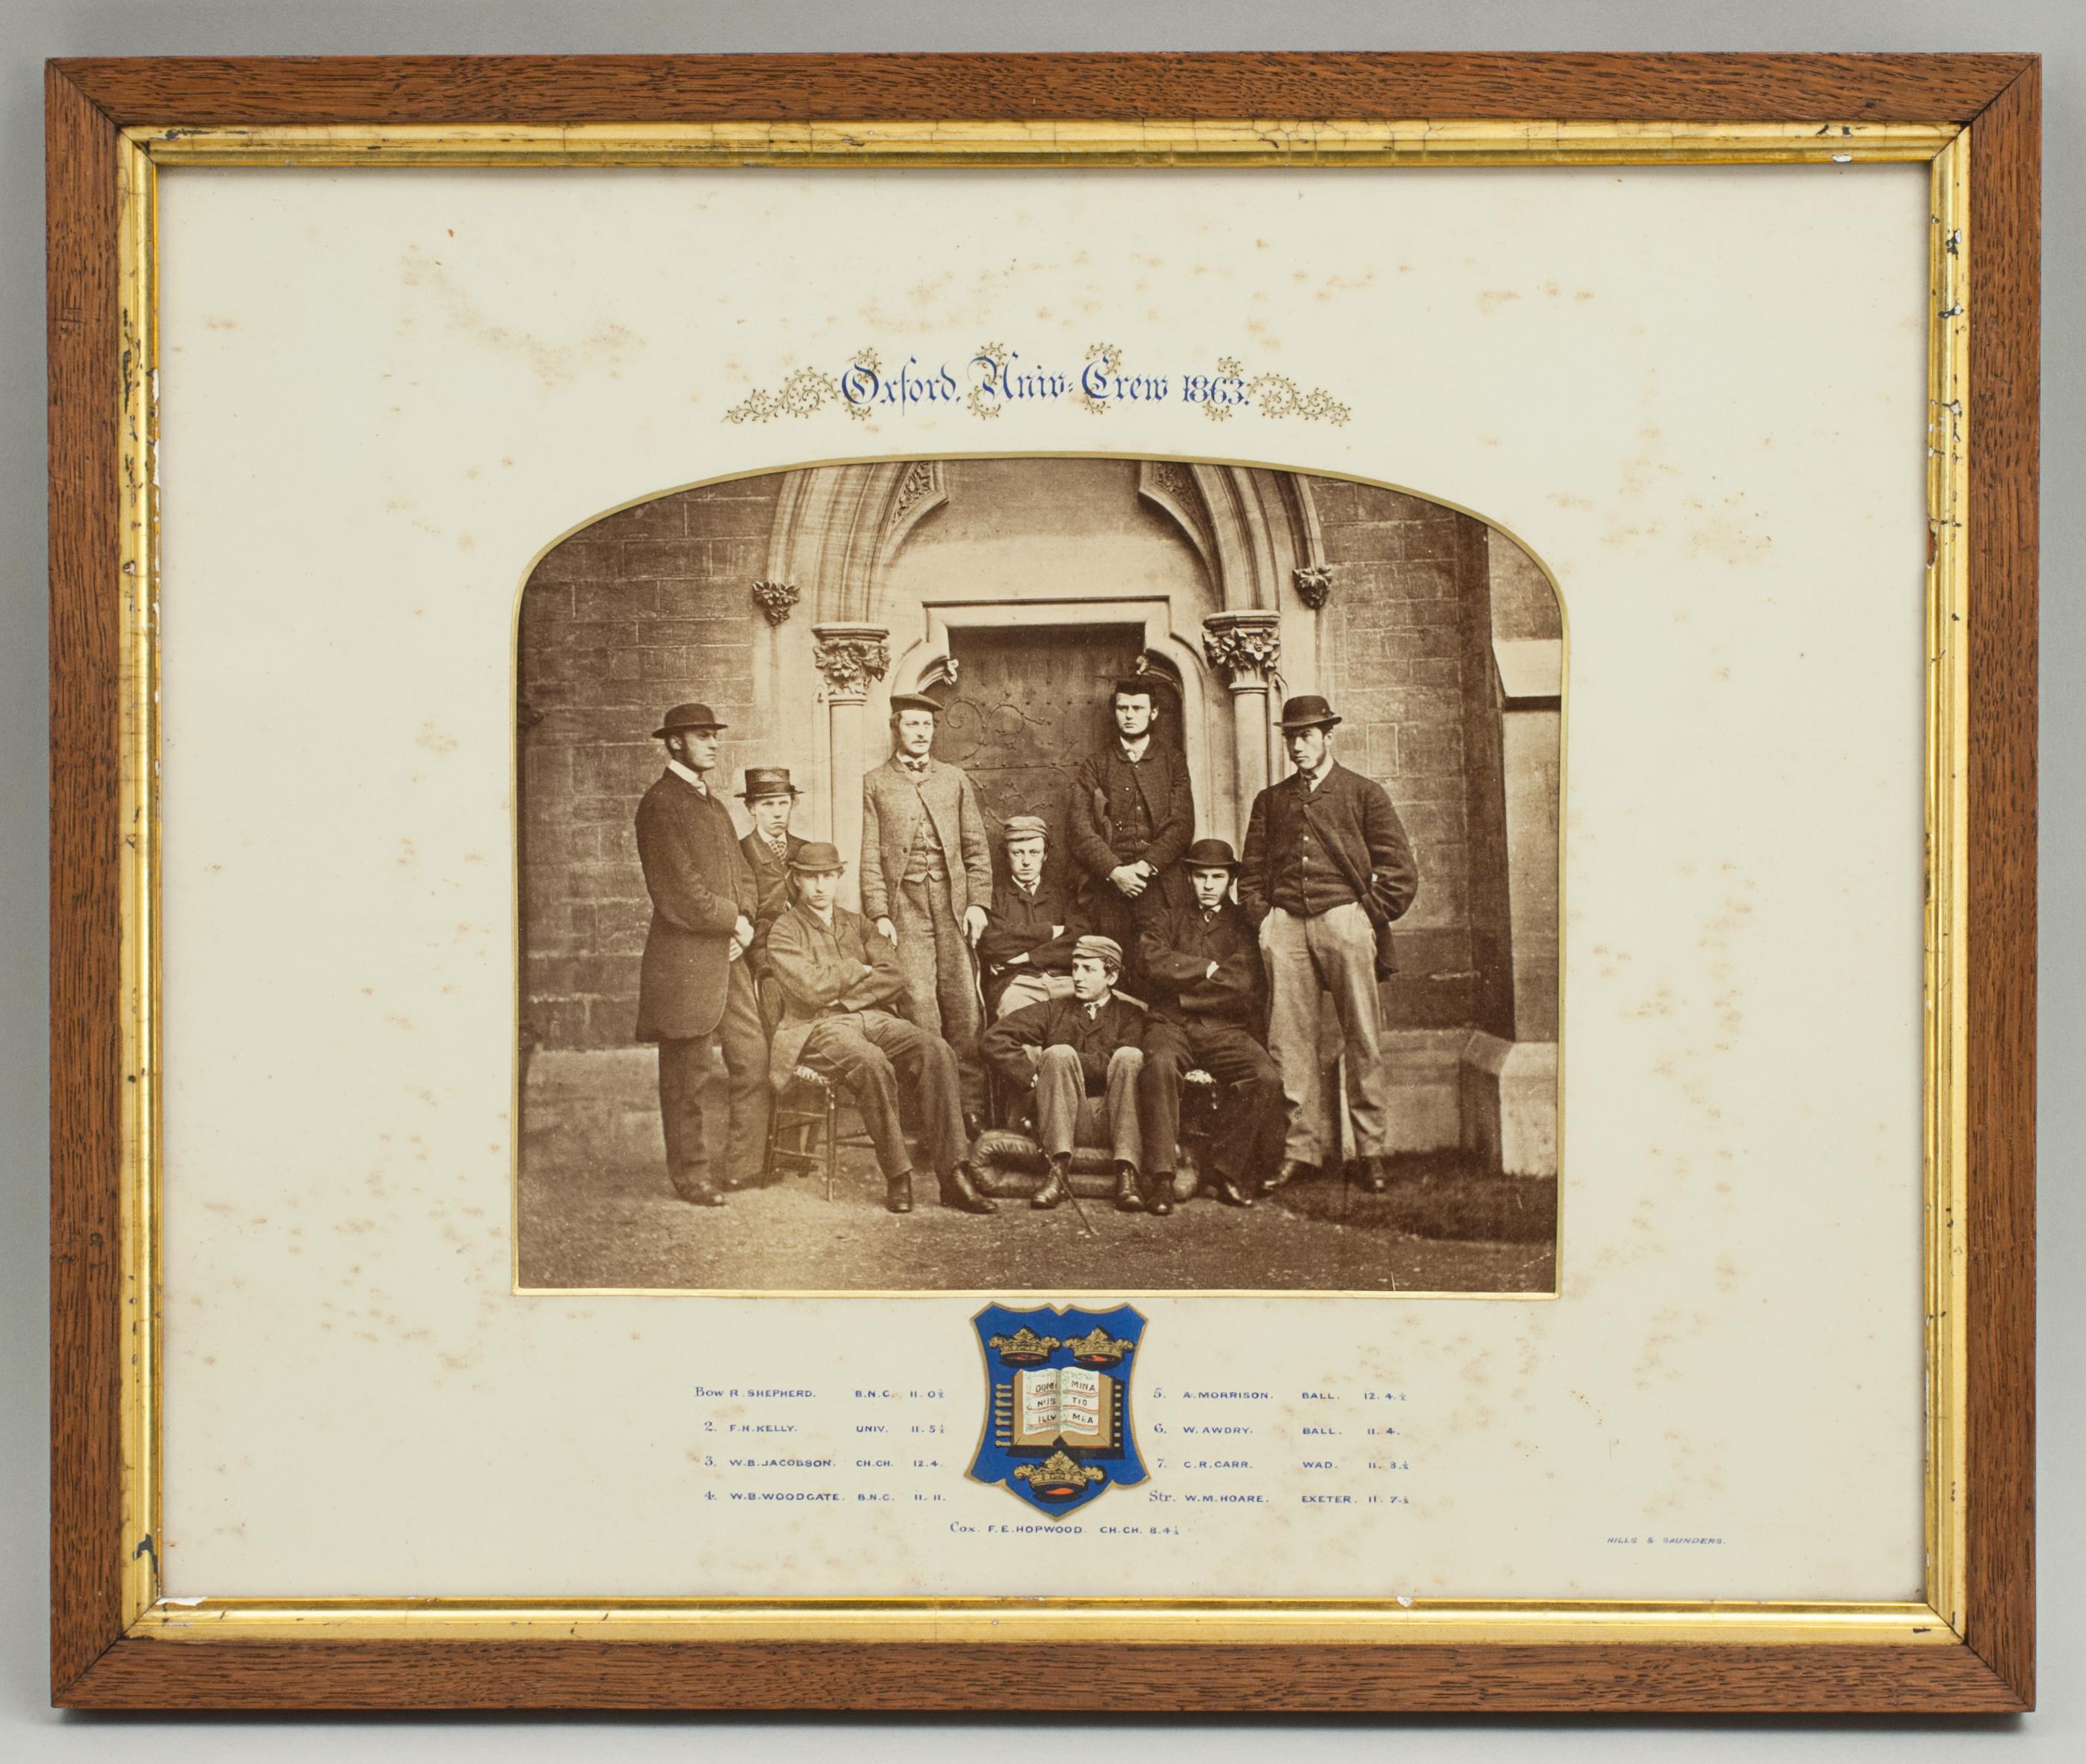 Three University Boatrace Photographs.
27167 Oxford, Boat race team 1863.
27168 Oxford Boat race team 1864
25345 Cambridge Queens lent boat double photograph 1900

This is the most wonderful memento of the 1863 Oxford and Cambridge University boat